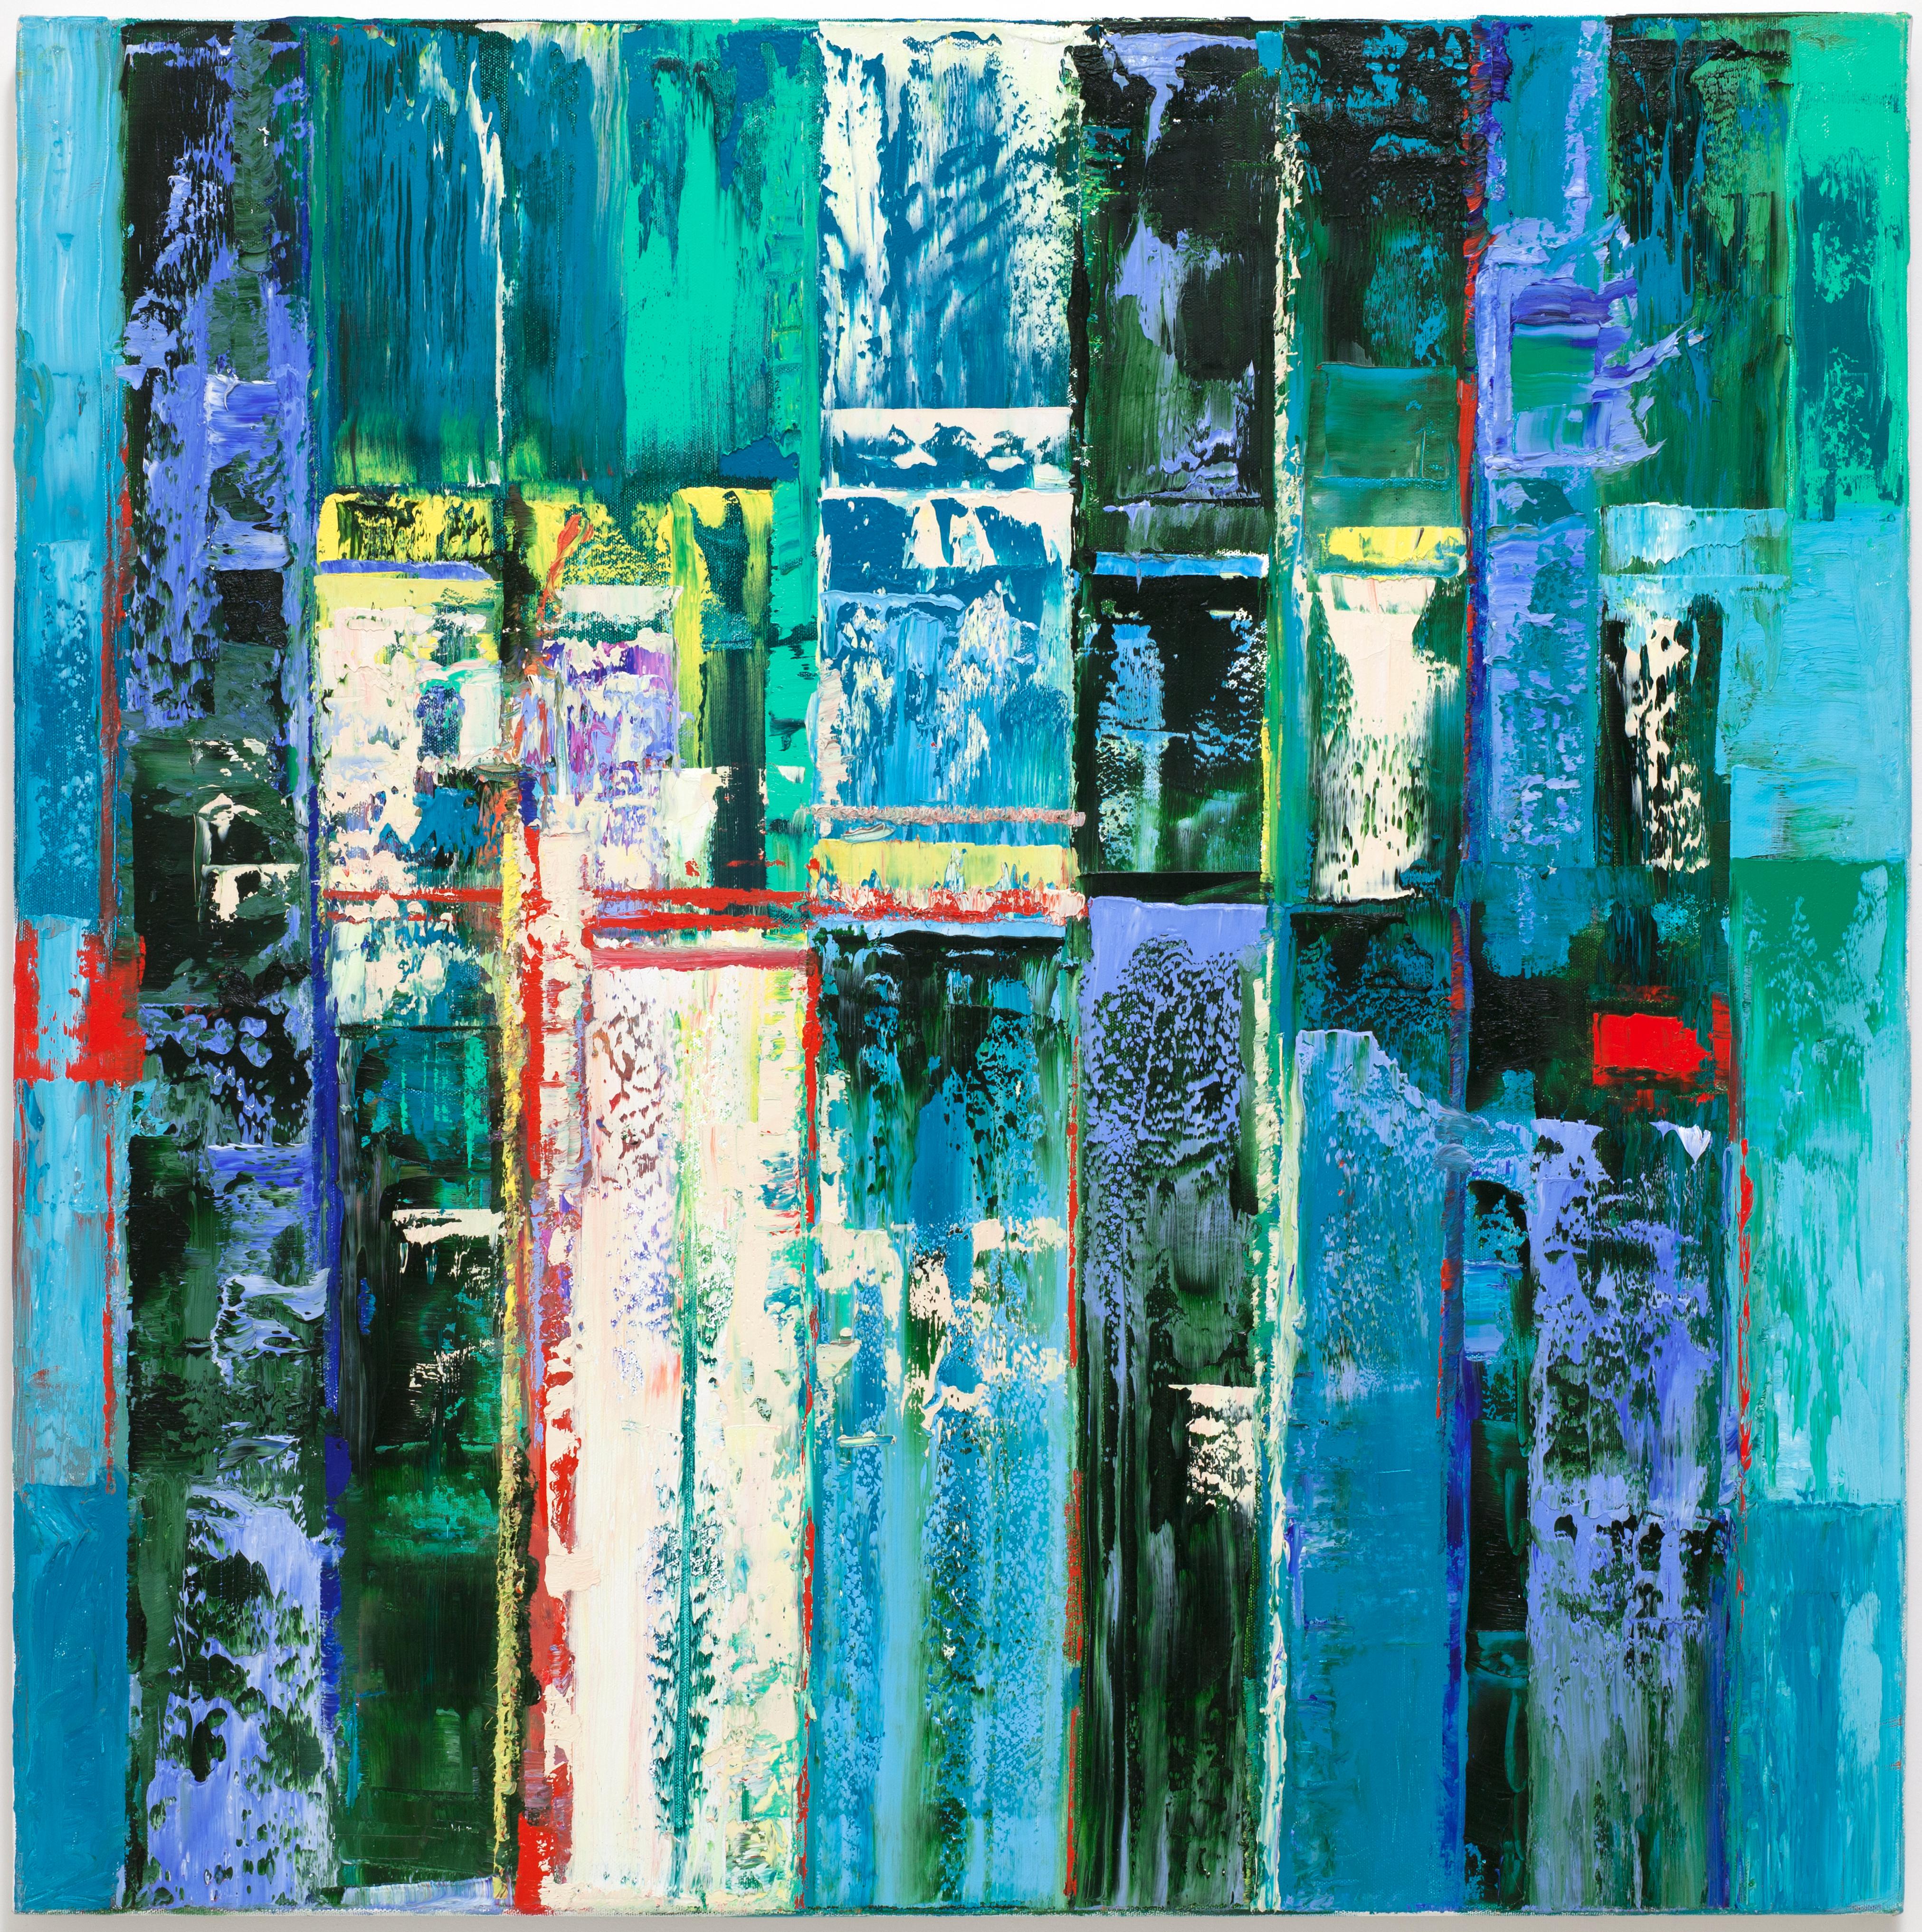 "Large Abstraction, Mostly Blue, with Turquoise, Green, Blue, White, Red, Black"